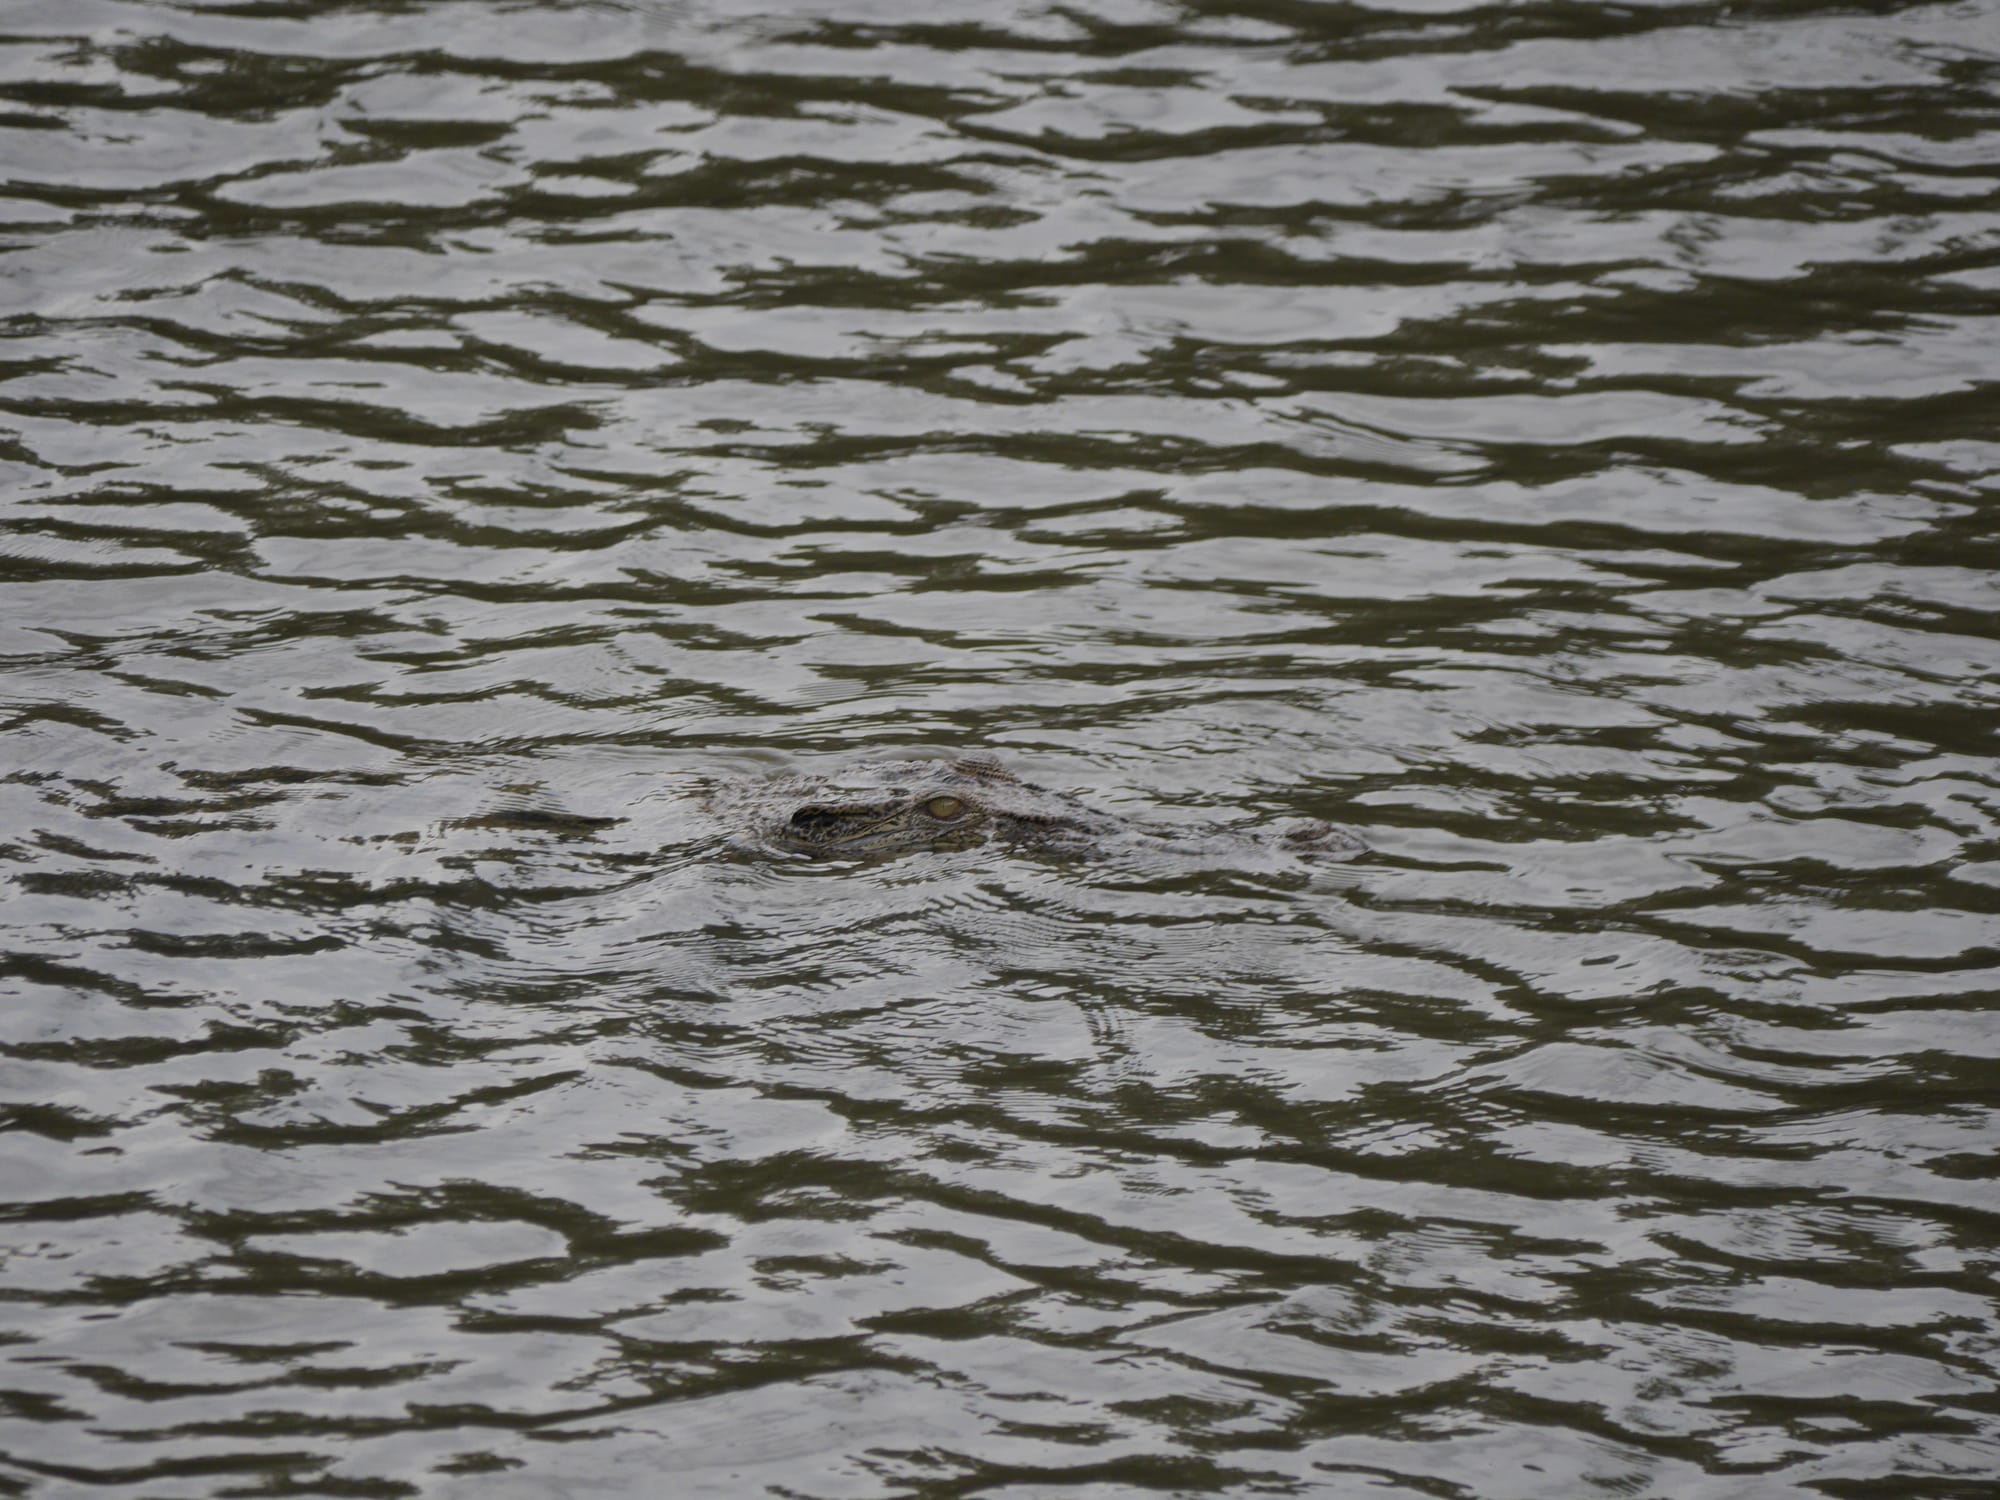 Photo by Author — I still can’t believe there are crocodiles in Singapore — Sungei Buloh Wetland Reserve, Singapore